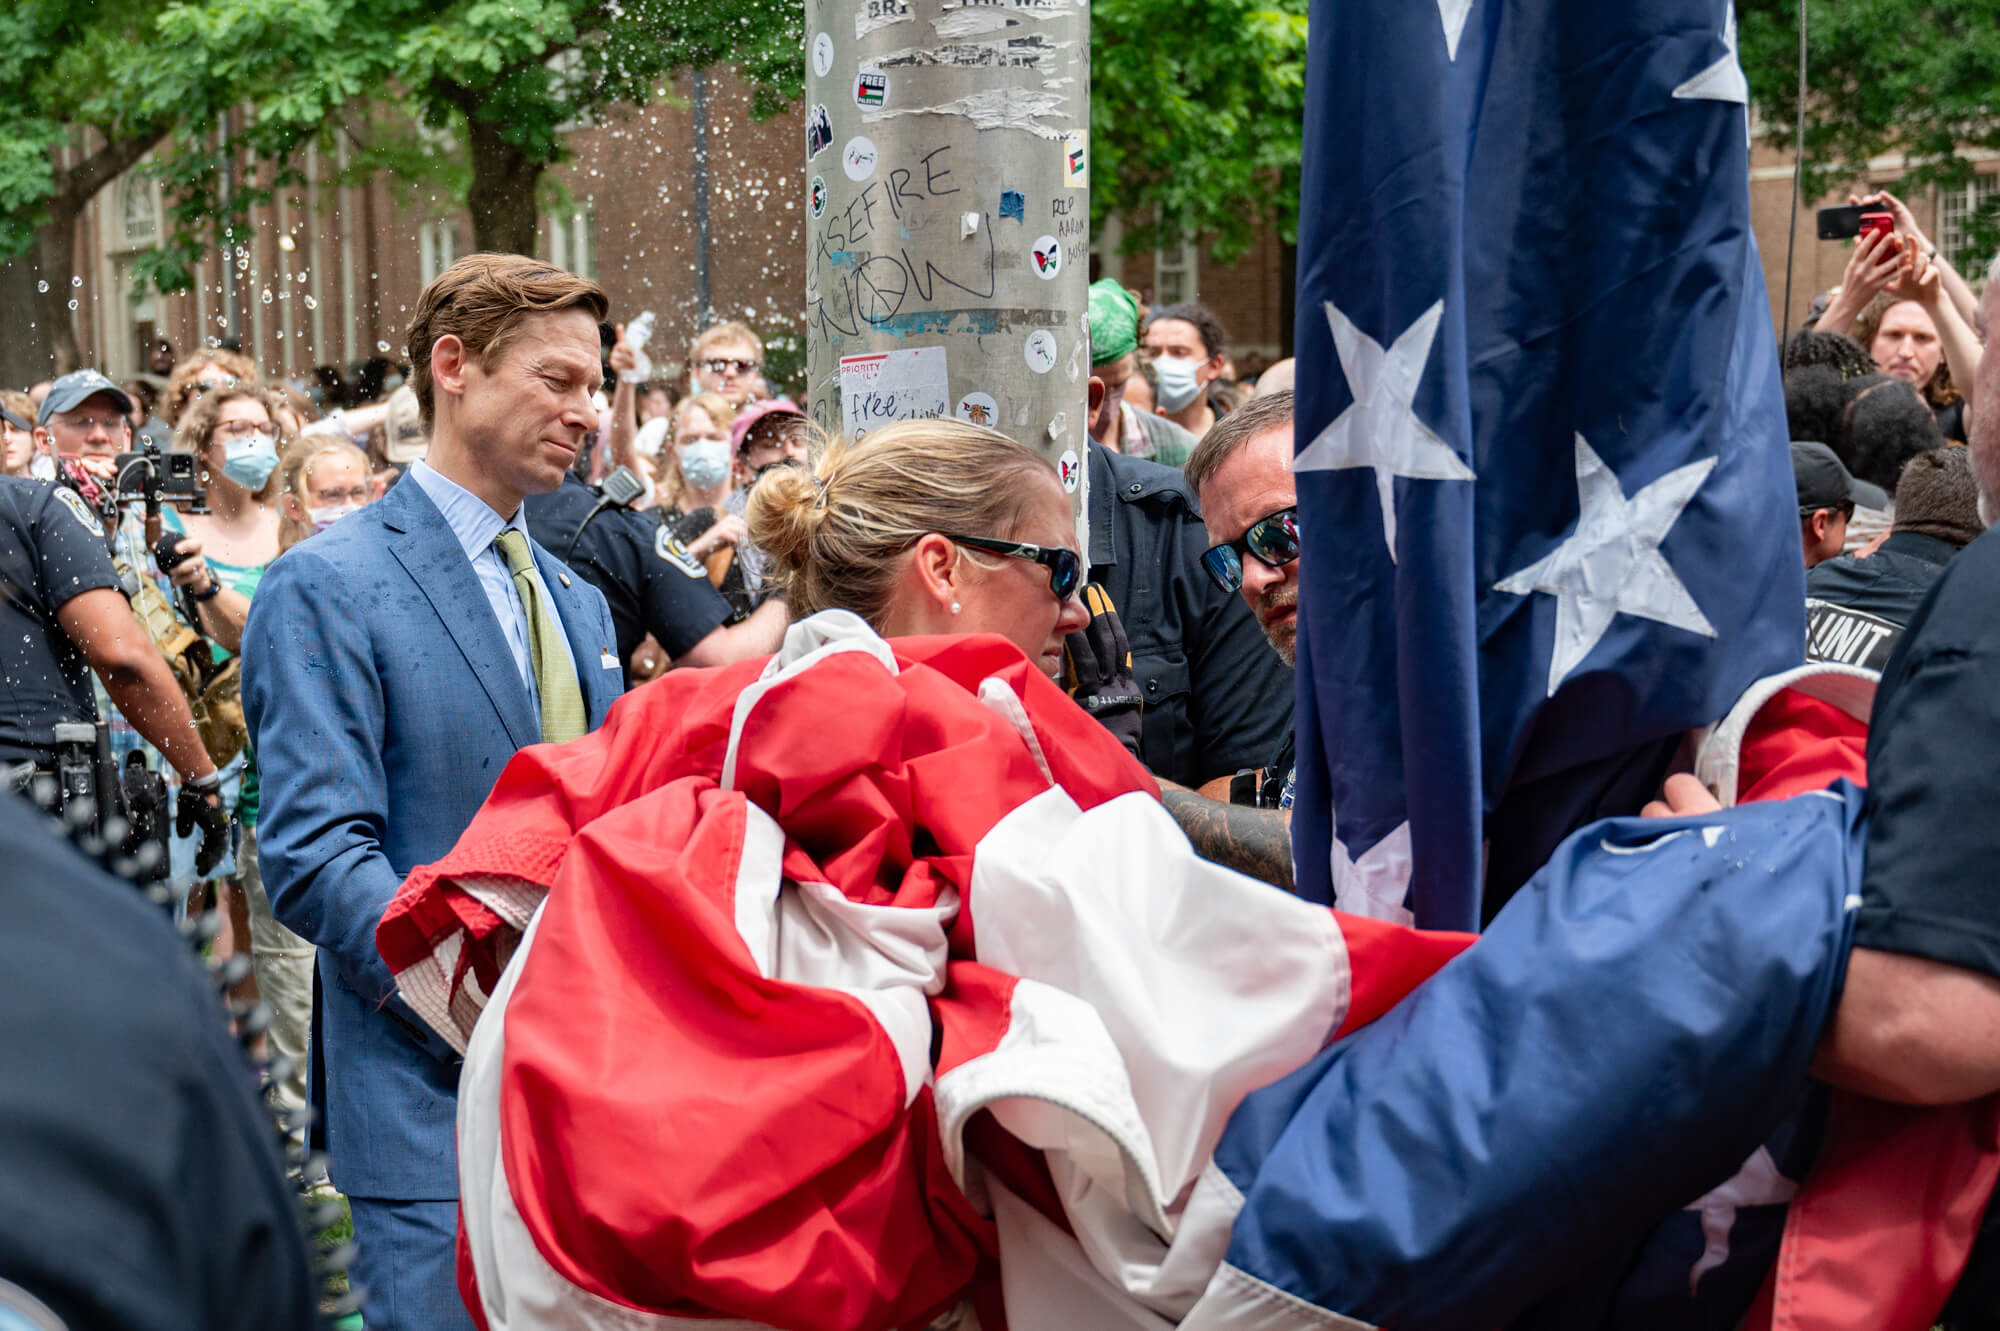 Police escort Lee Roberts, interim chancellor of the University of North Carolina, through a crowd of protesters to restore an American flag to a pole at the center of campus.